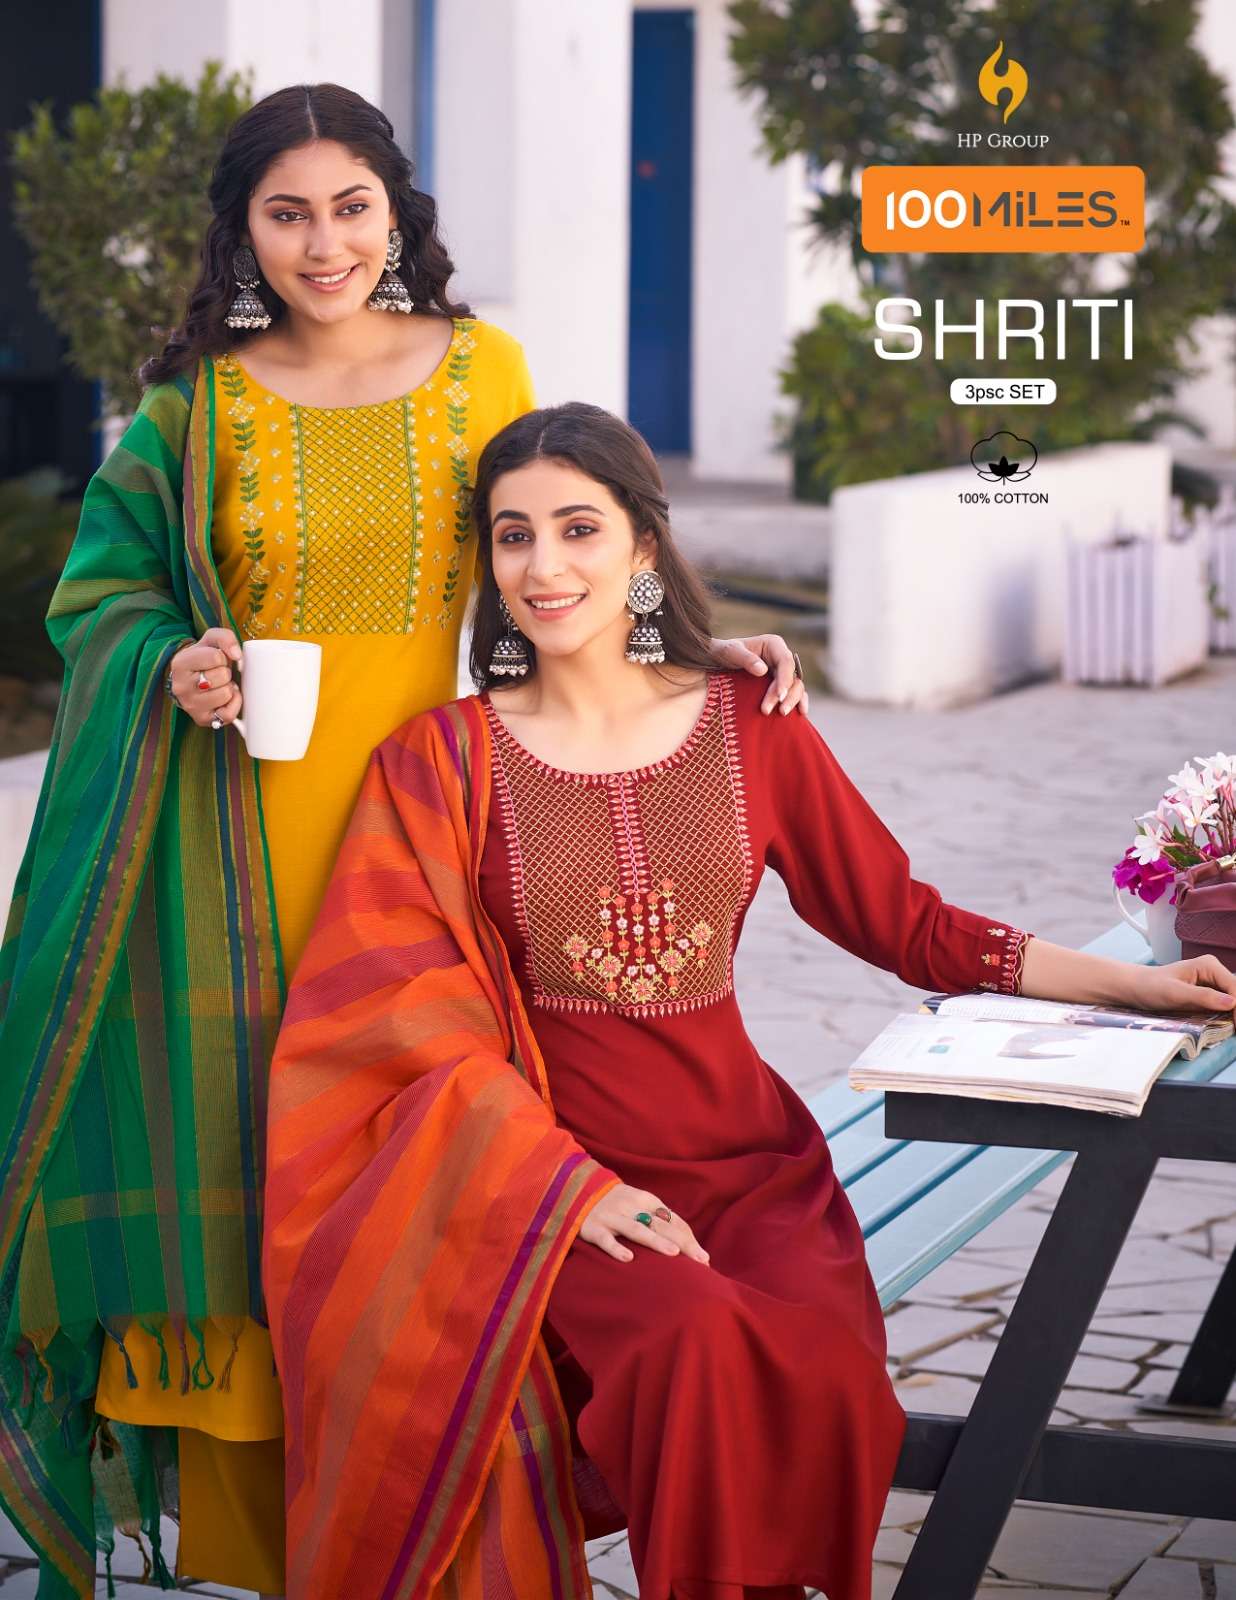 100 MILES SHRITI PURE COTTON EMBROIDERY STITCHED SUITS WHOLE...